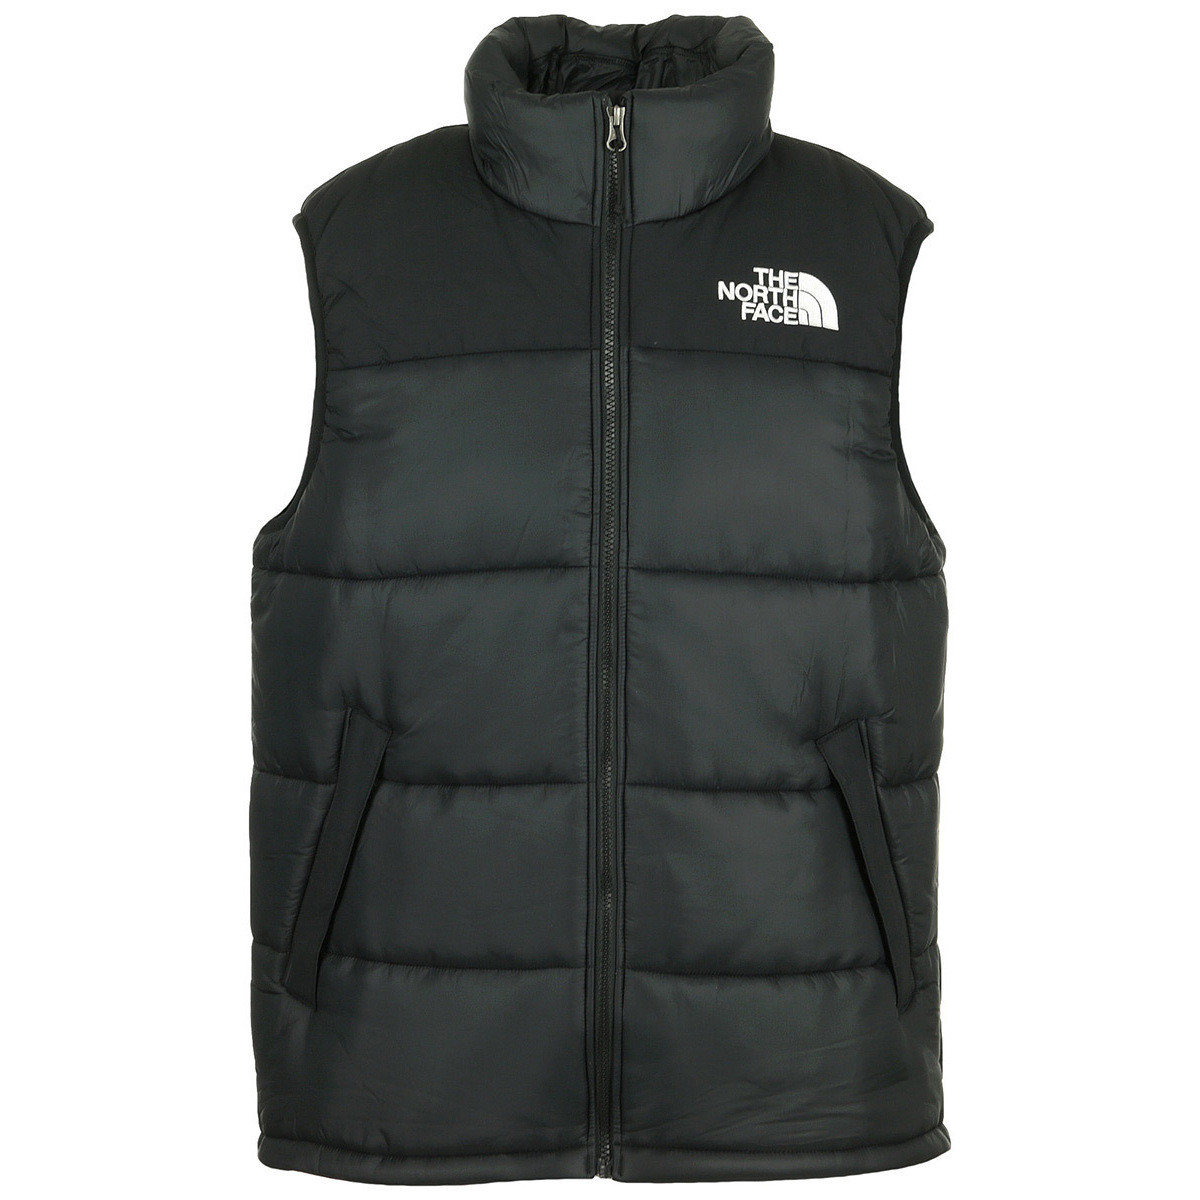 textil Hombre Plumas The North Face Himalayan Insulated Vest Negro